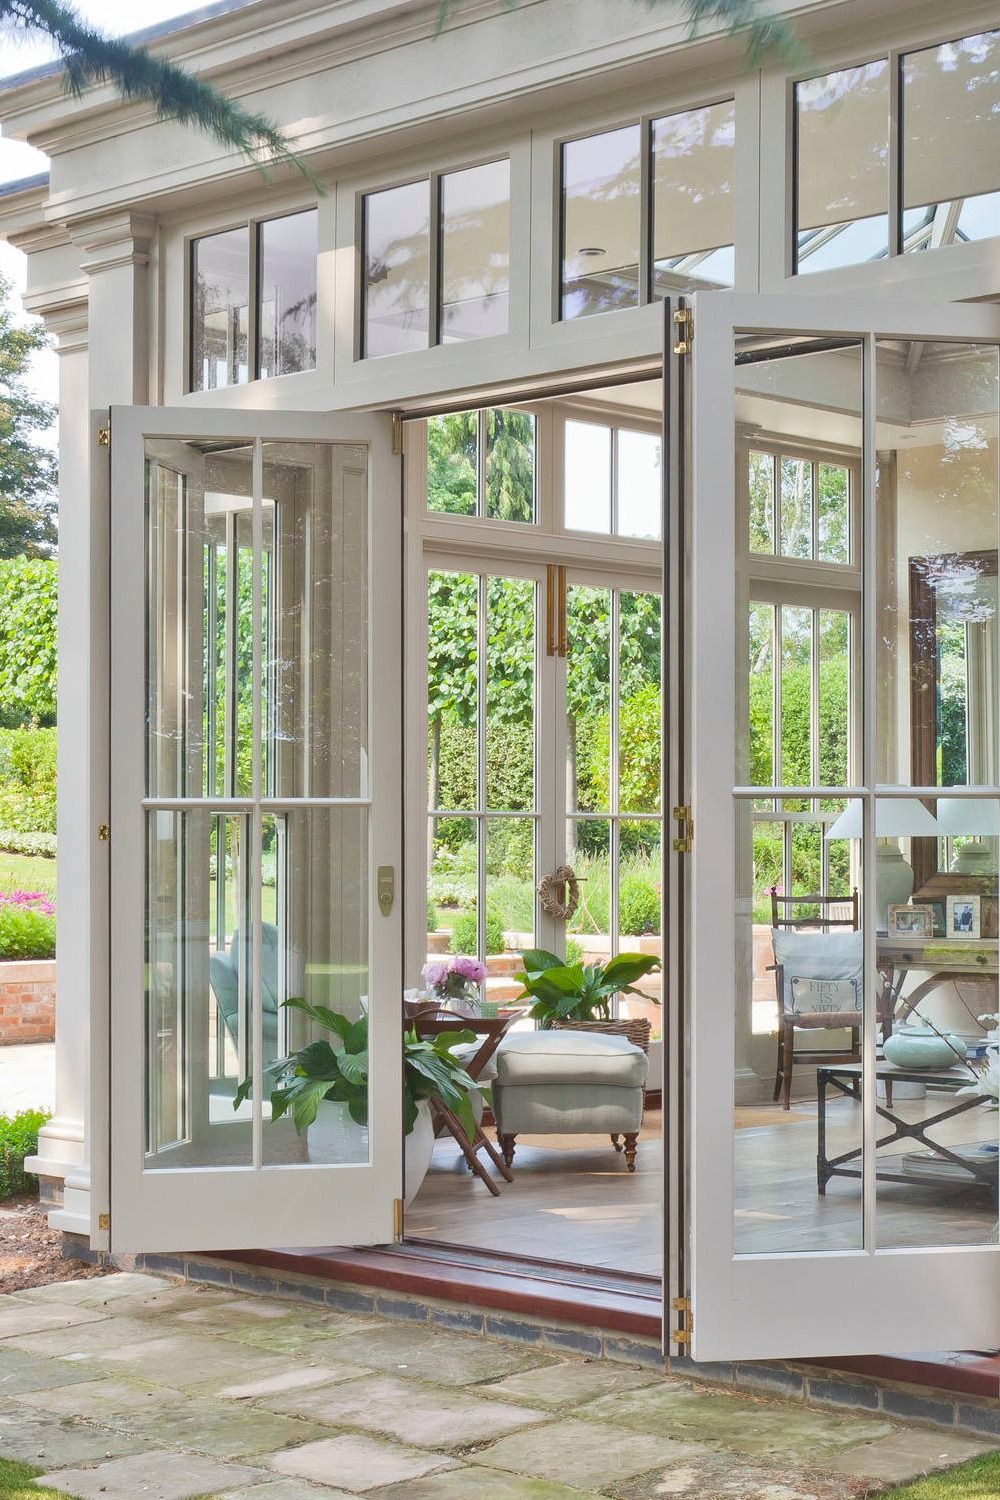 The Many Benefits of Installing Folding
Doors in Your Home